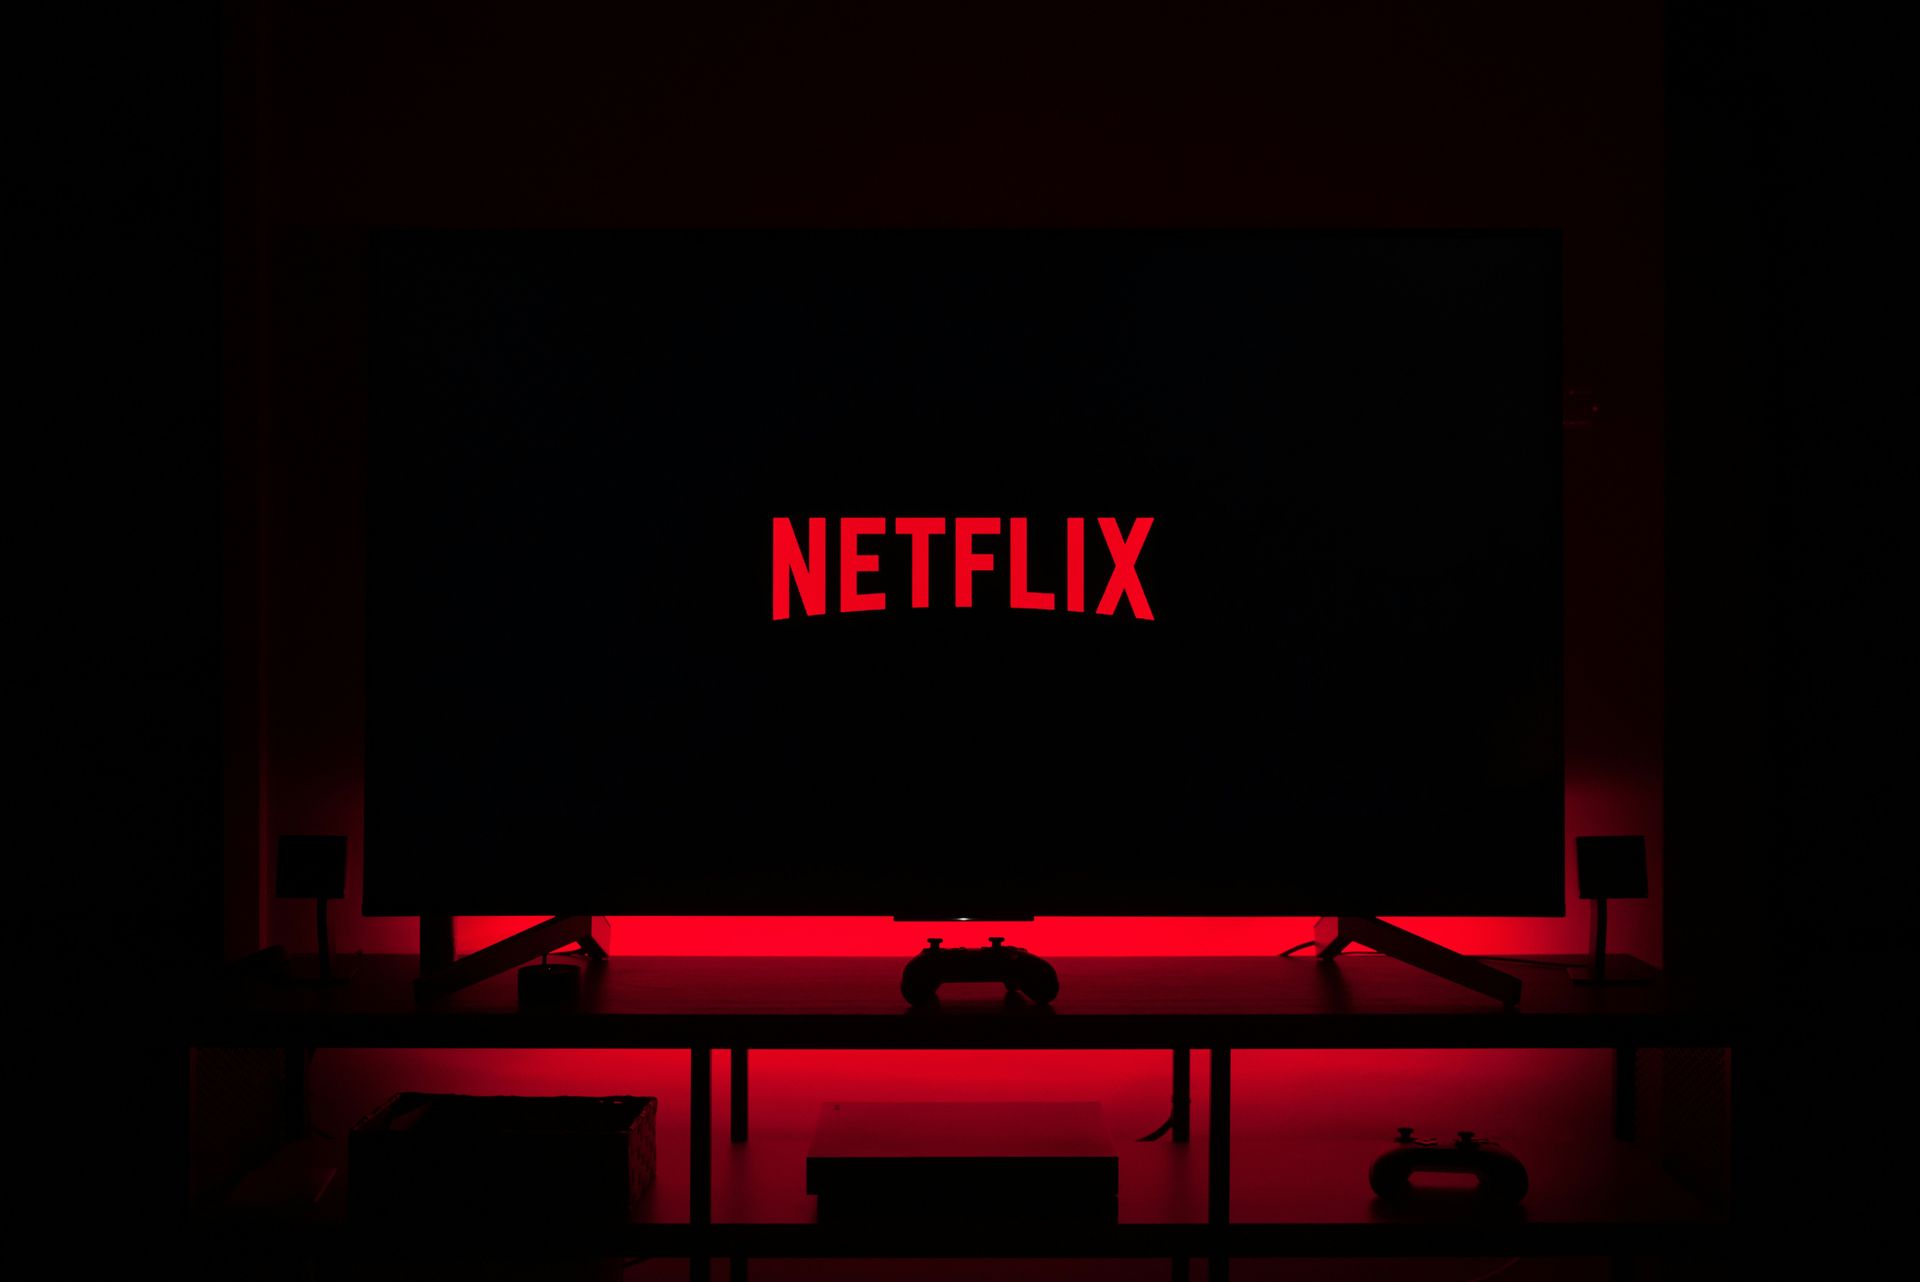 Netflix increases subscribers by 9.3 million